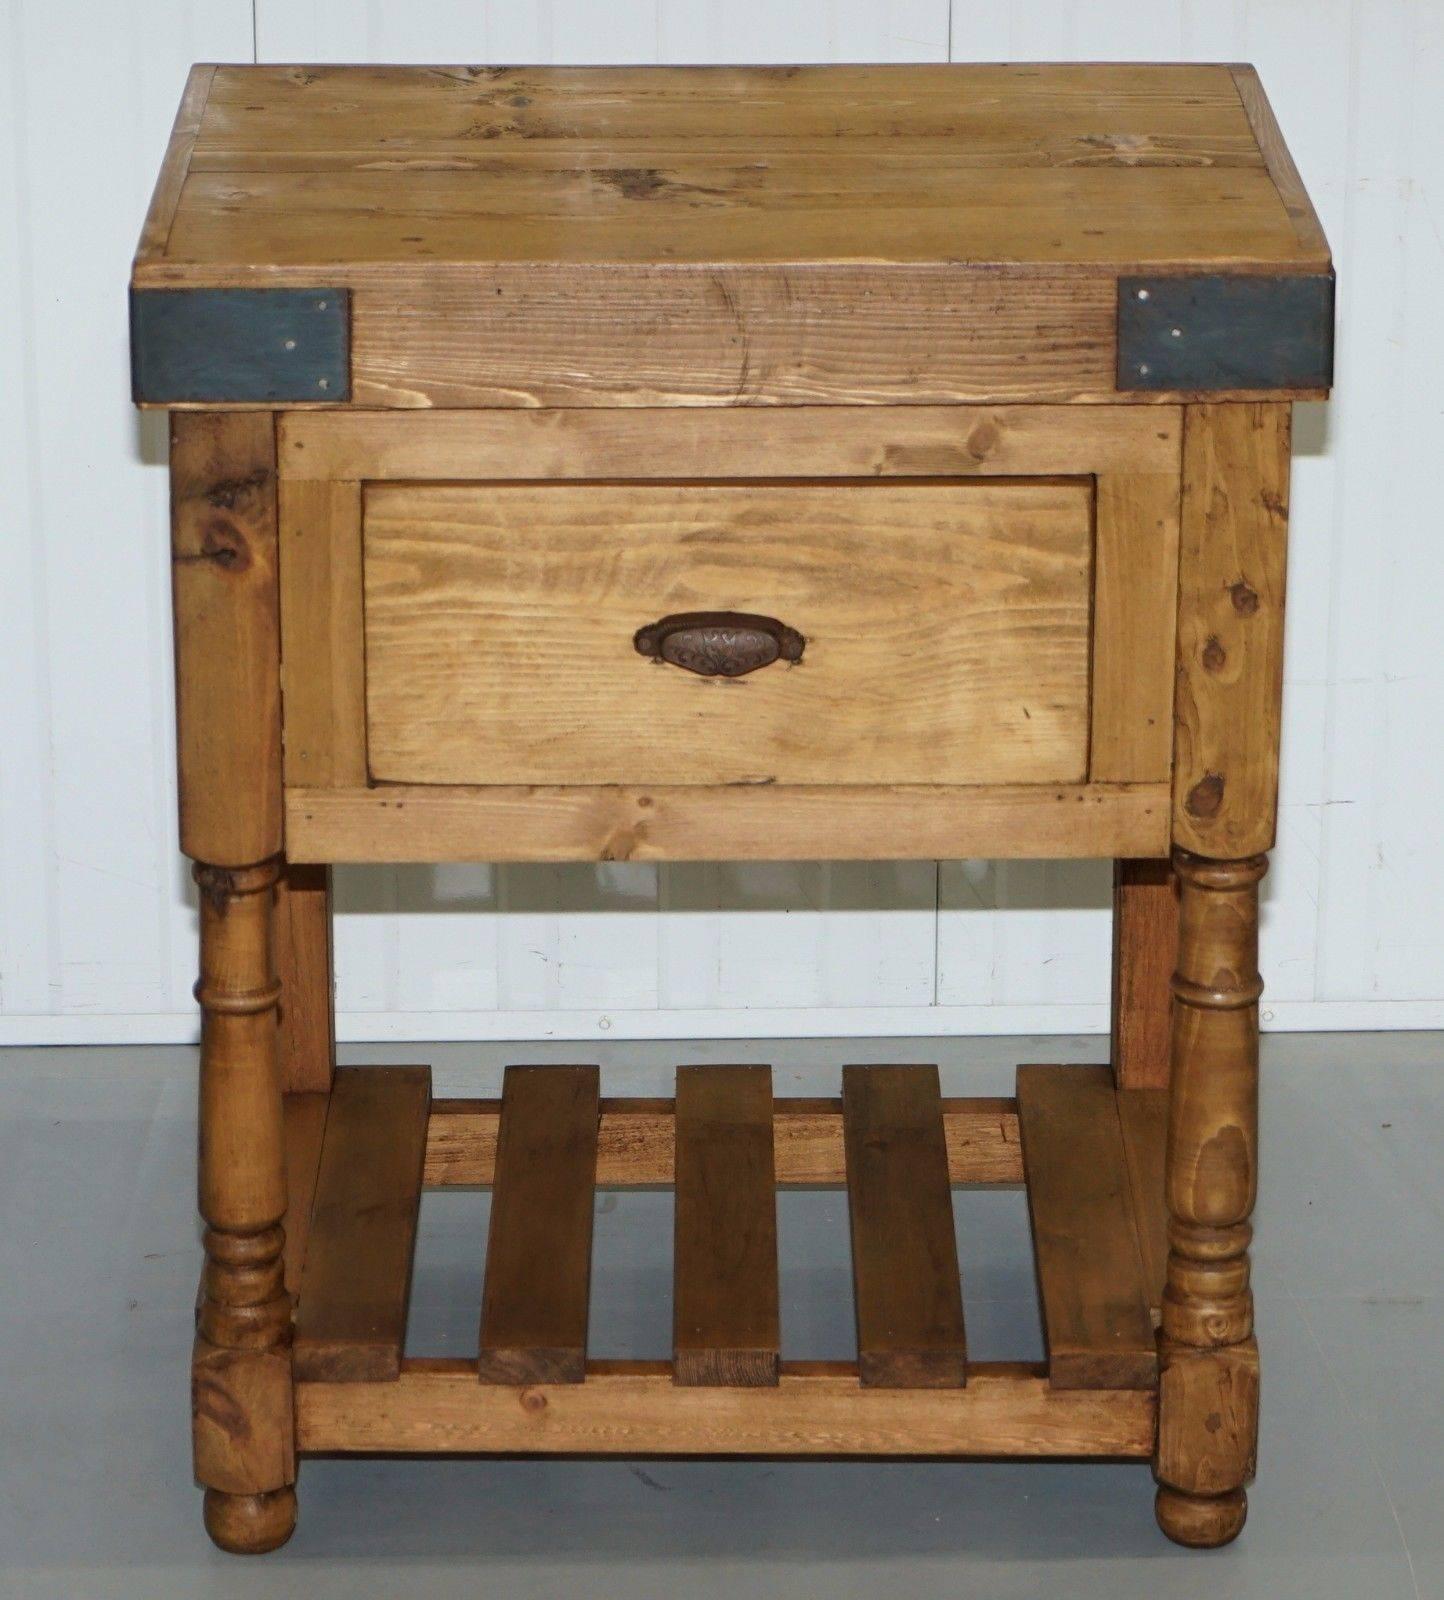 We are delighted to offer for sale this lovely solid oak kitchen island Butchers Block

A really decorative and helpful kitchen aid in excellent unused condition, the large central drawer is really quite huge and will happily store all your